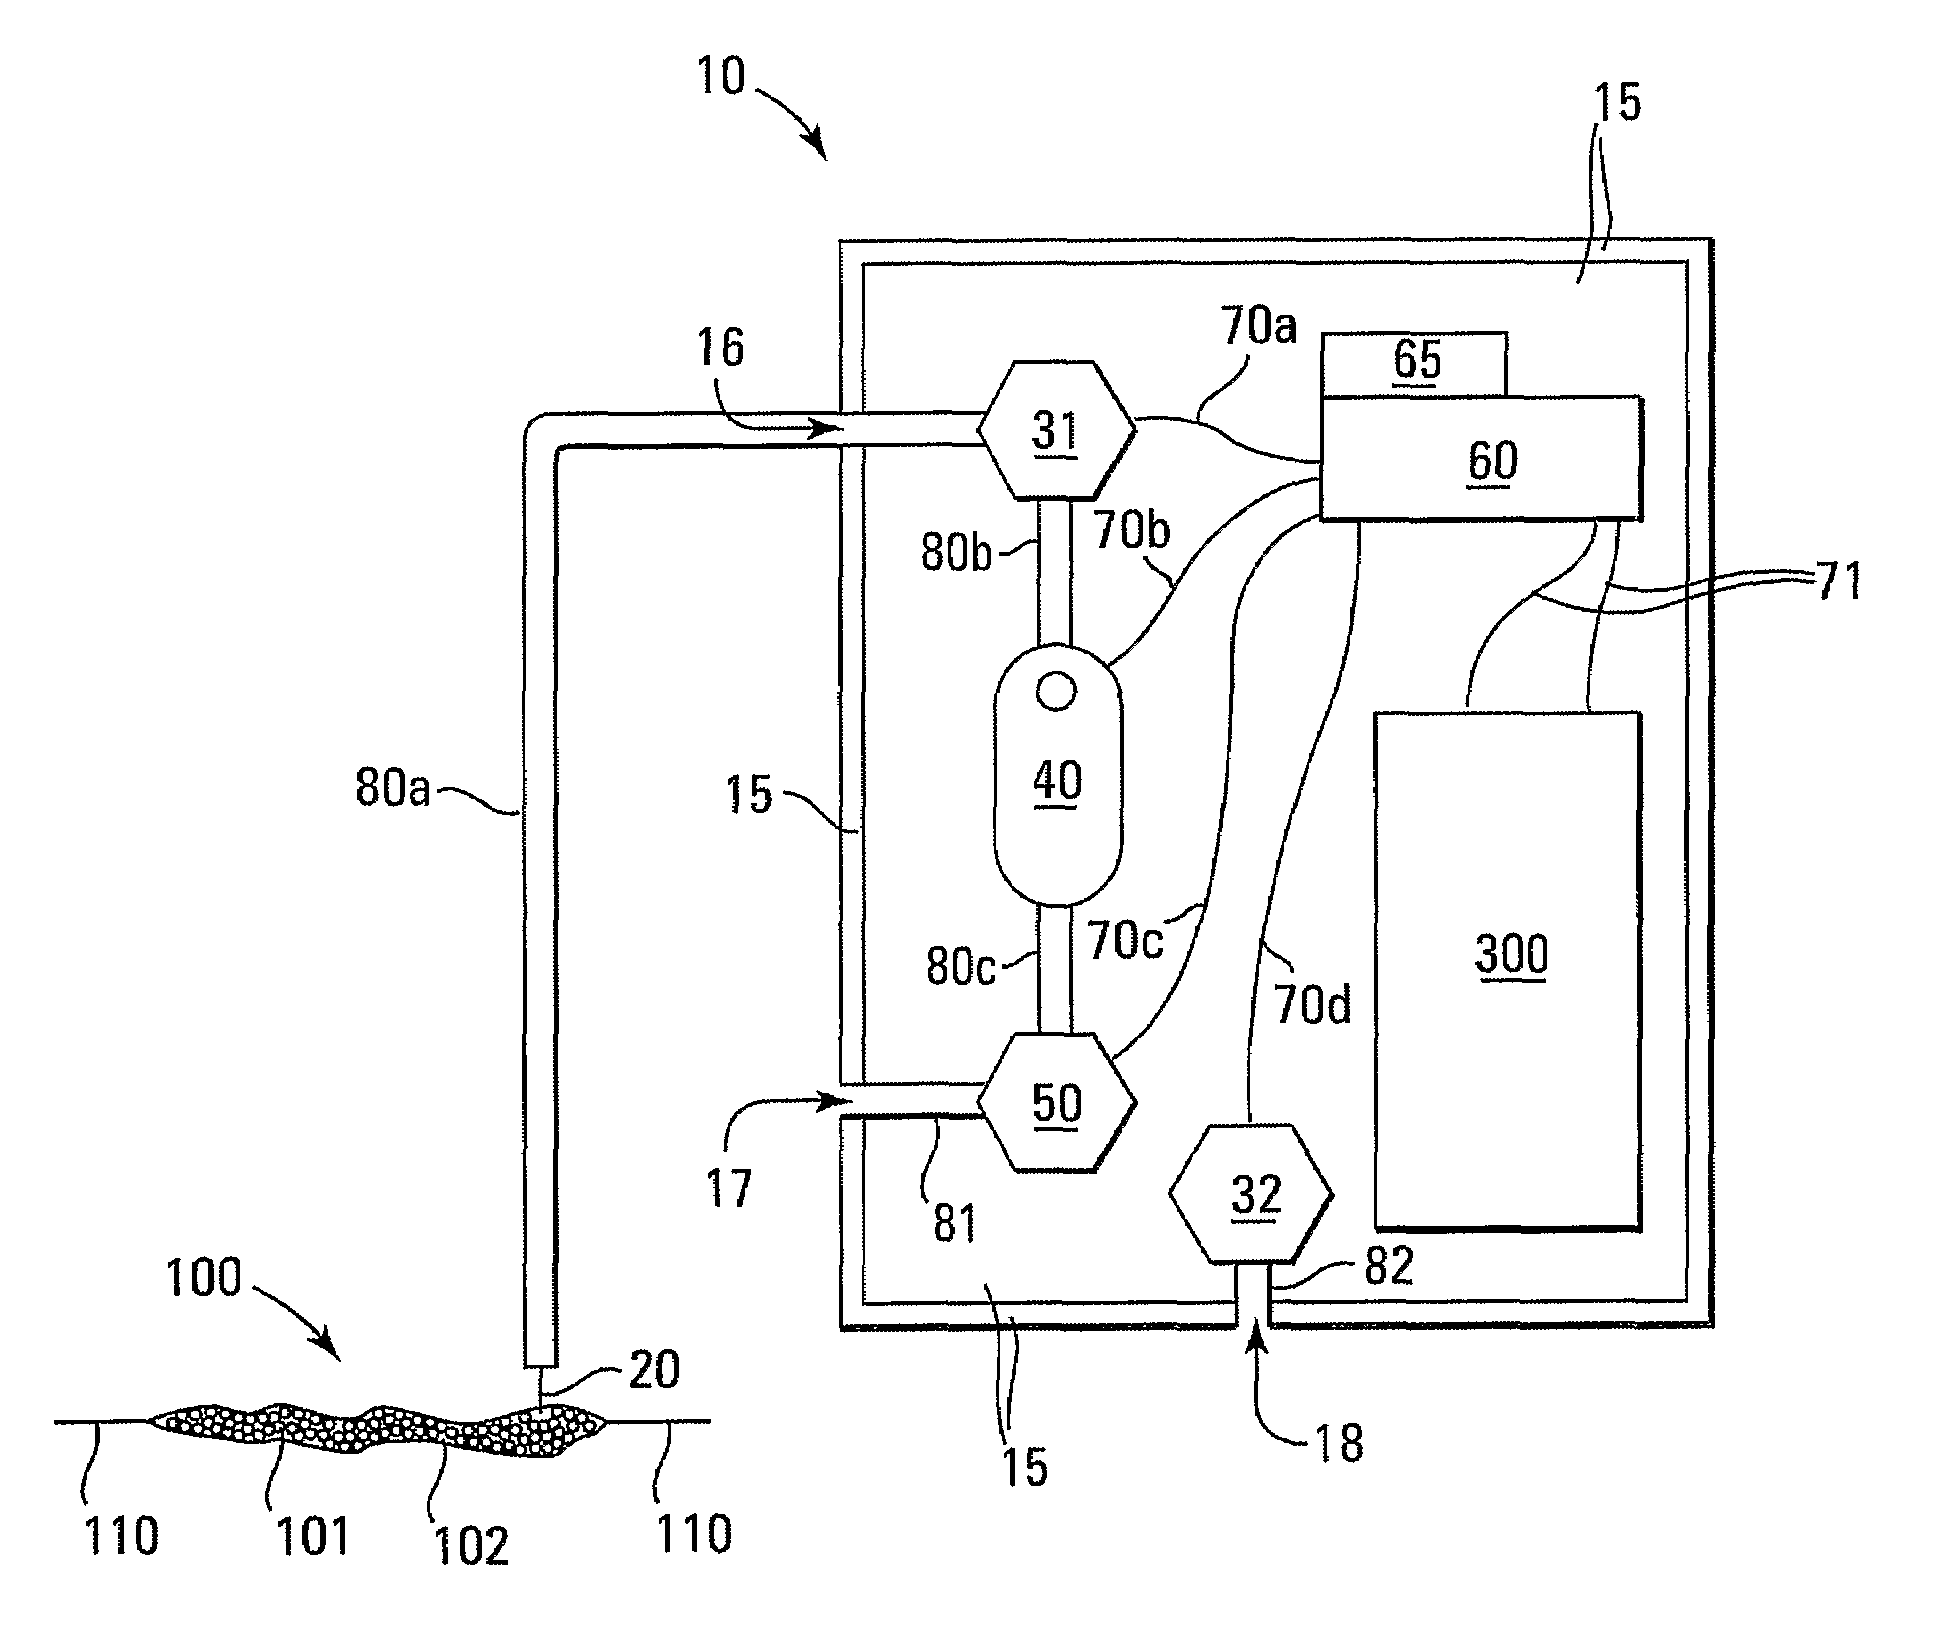 Instrument and method for detecting and reporting the size of leaks in hermetically sealed packaging